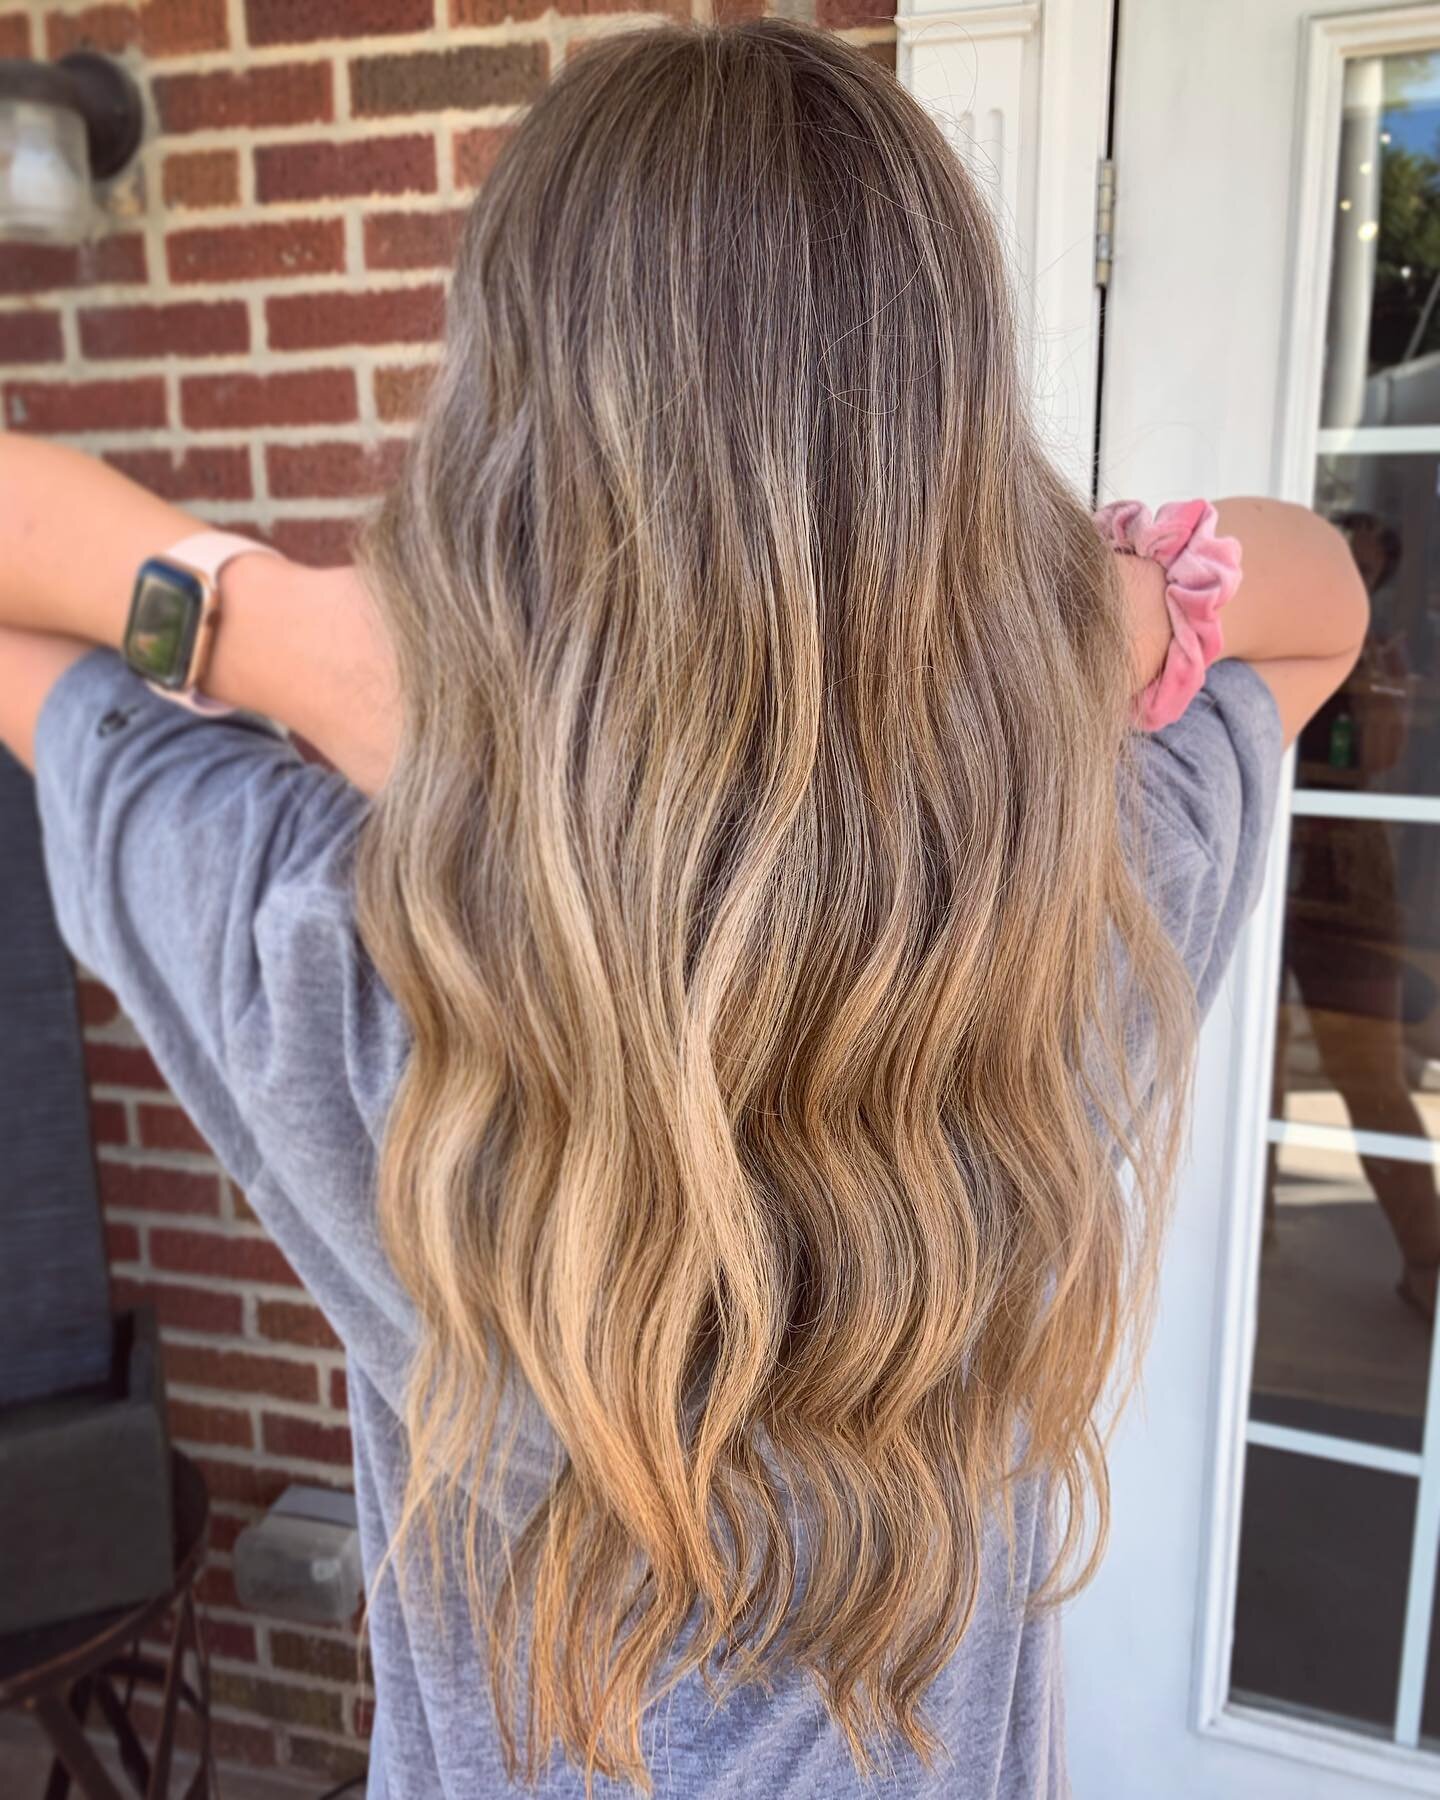 M E L T E D 🔥 a mixture of a full foilayage and balayage for this babe @kaylee.elaine.j 🥰